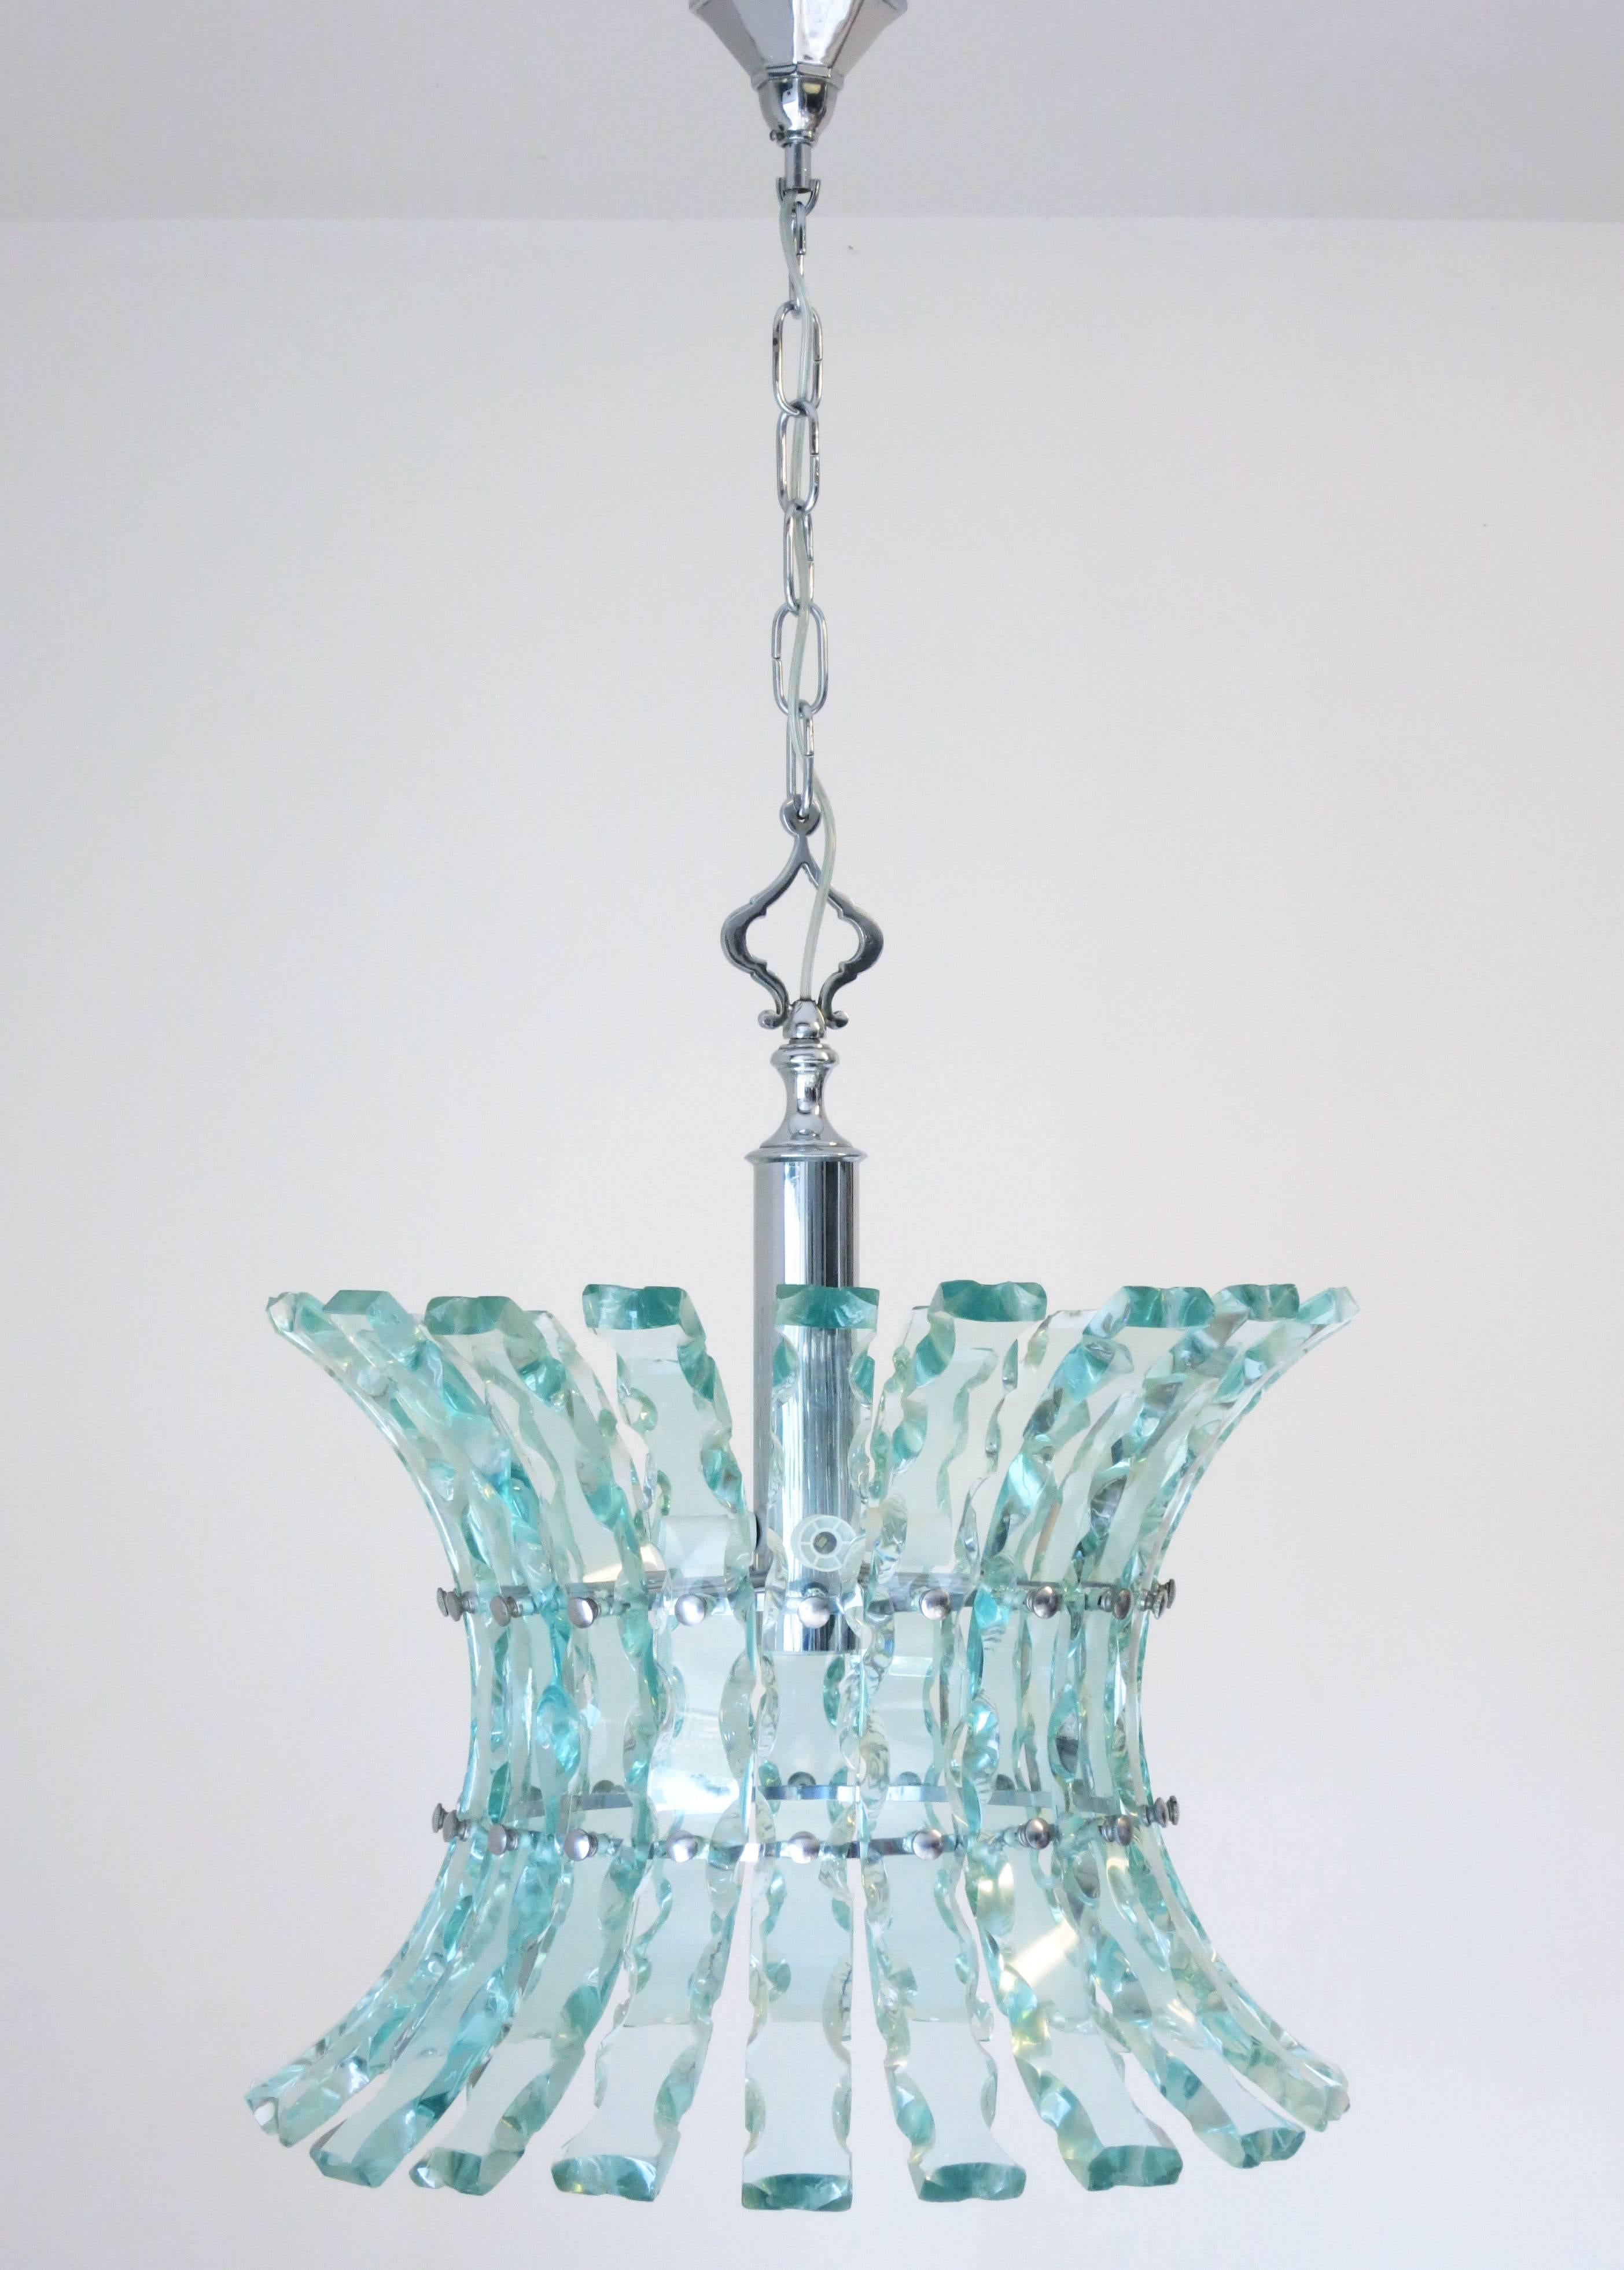 Mid-Century vintage Italian chandelier or pendant in beveled glass, in the style of Fontana Arte / Made in Italy in the 1960's.
5 lights / max 40W each
Diameter: 20 inches / Height: 32 inches including chain / Body Height: 24 inches from top of